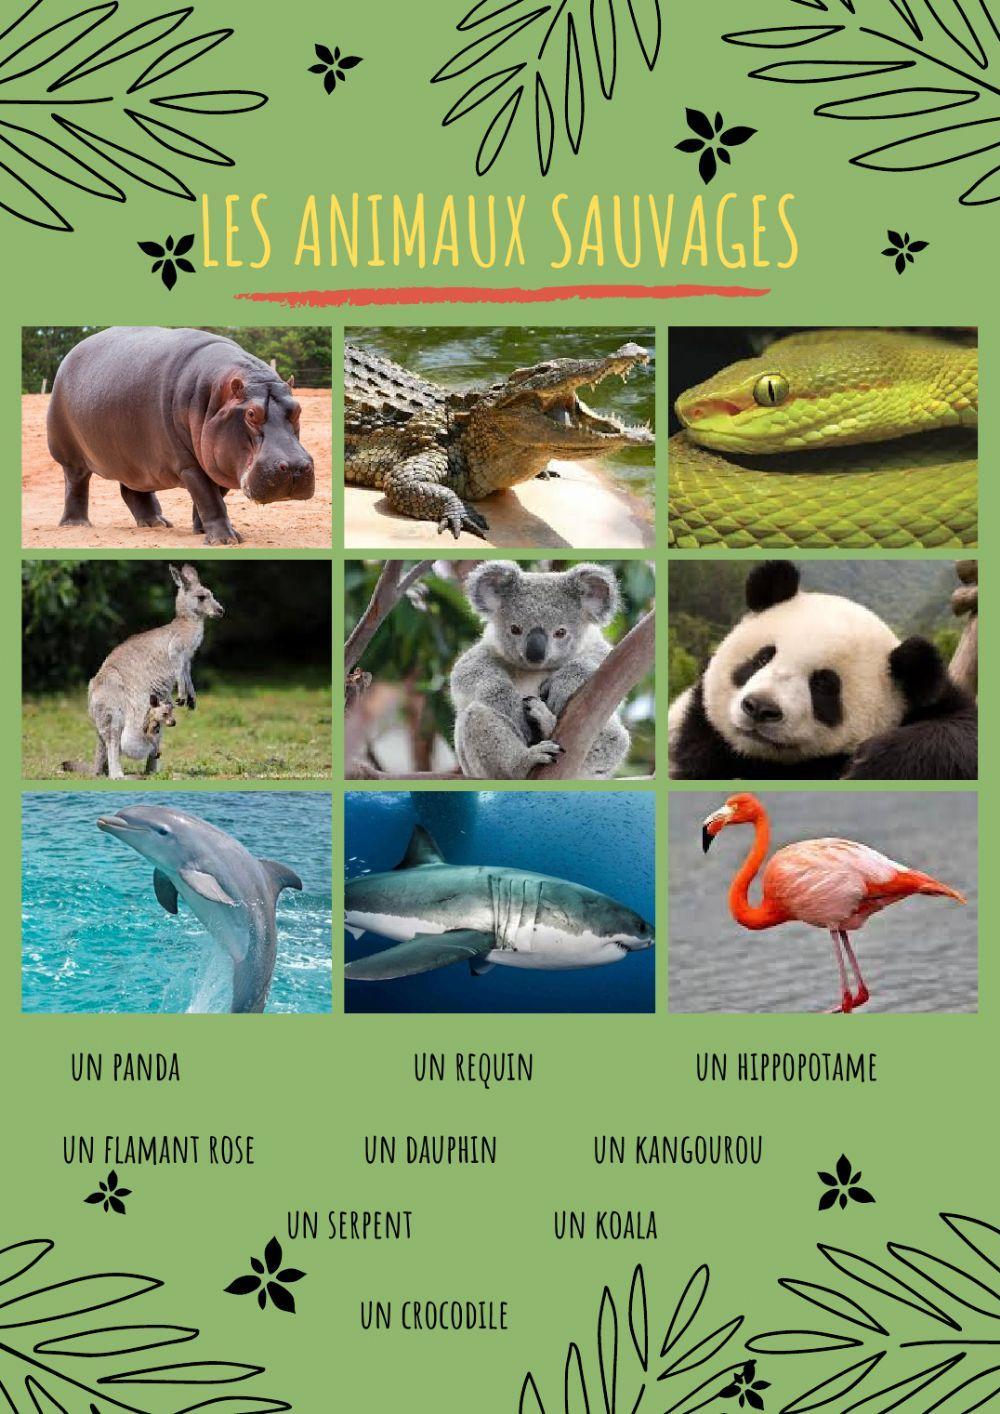 Les animaux sauvages.